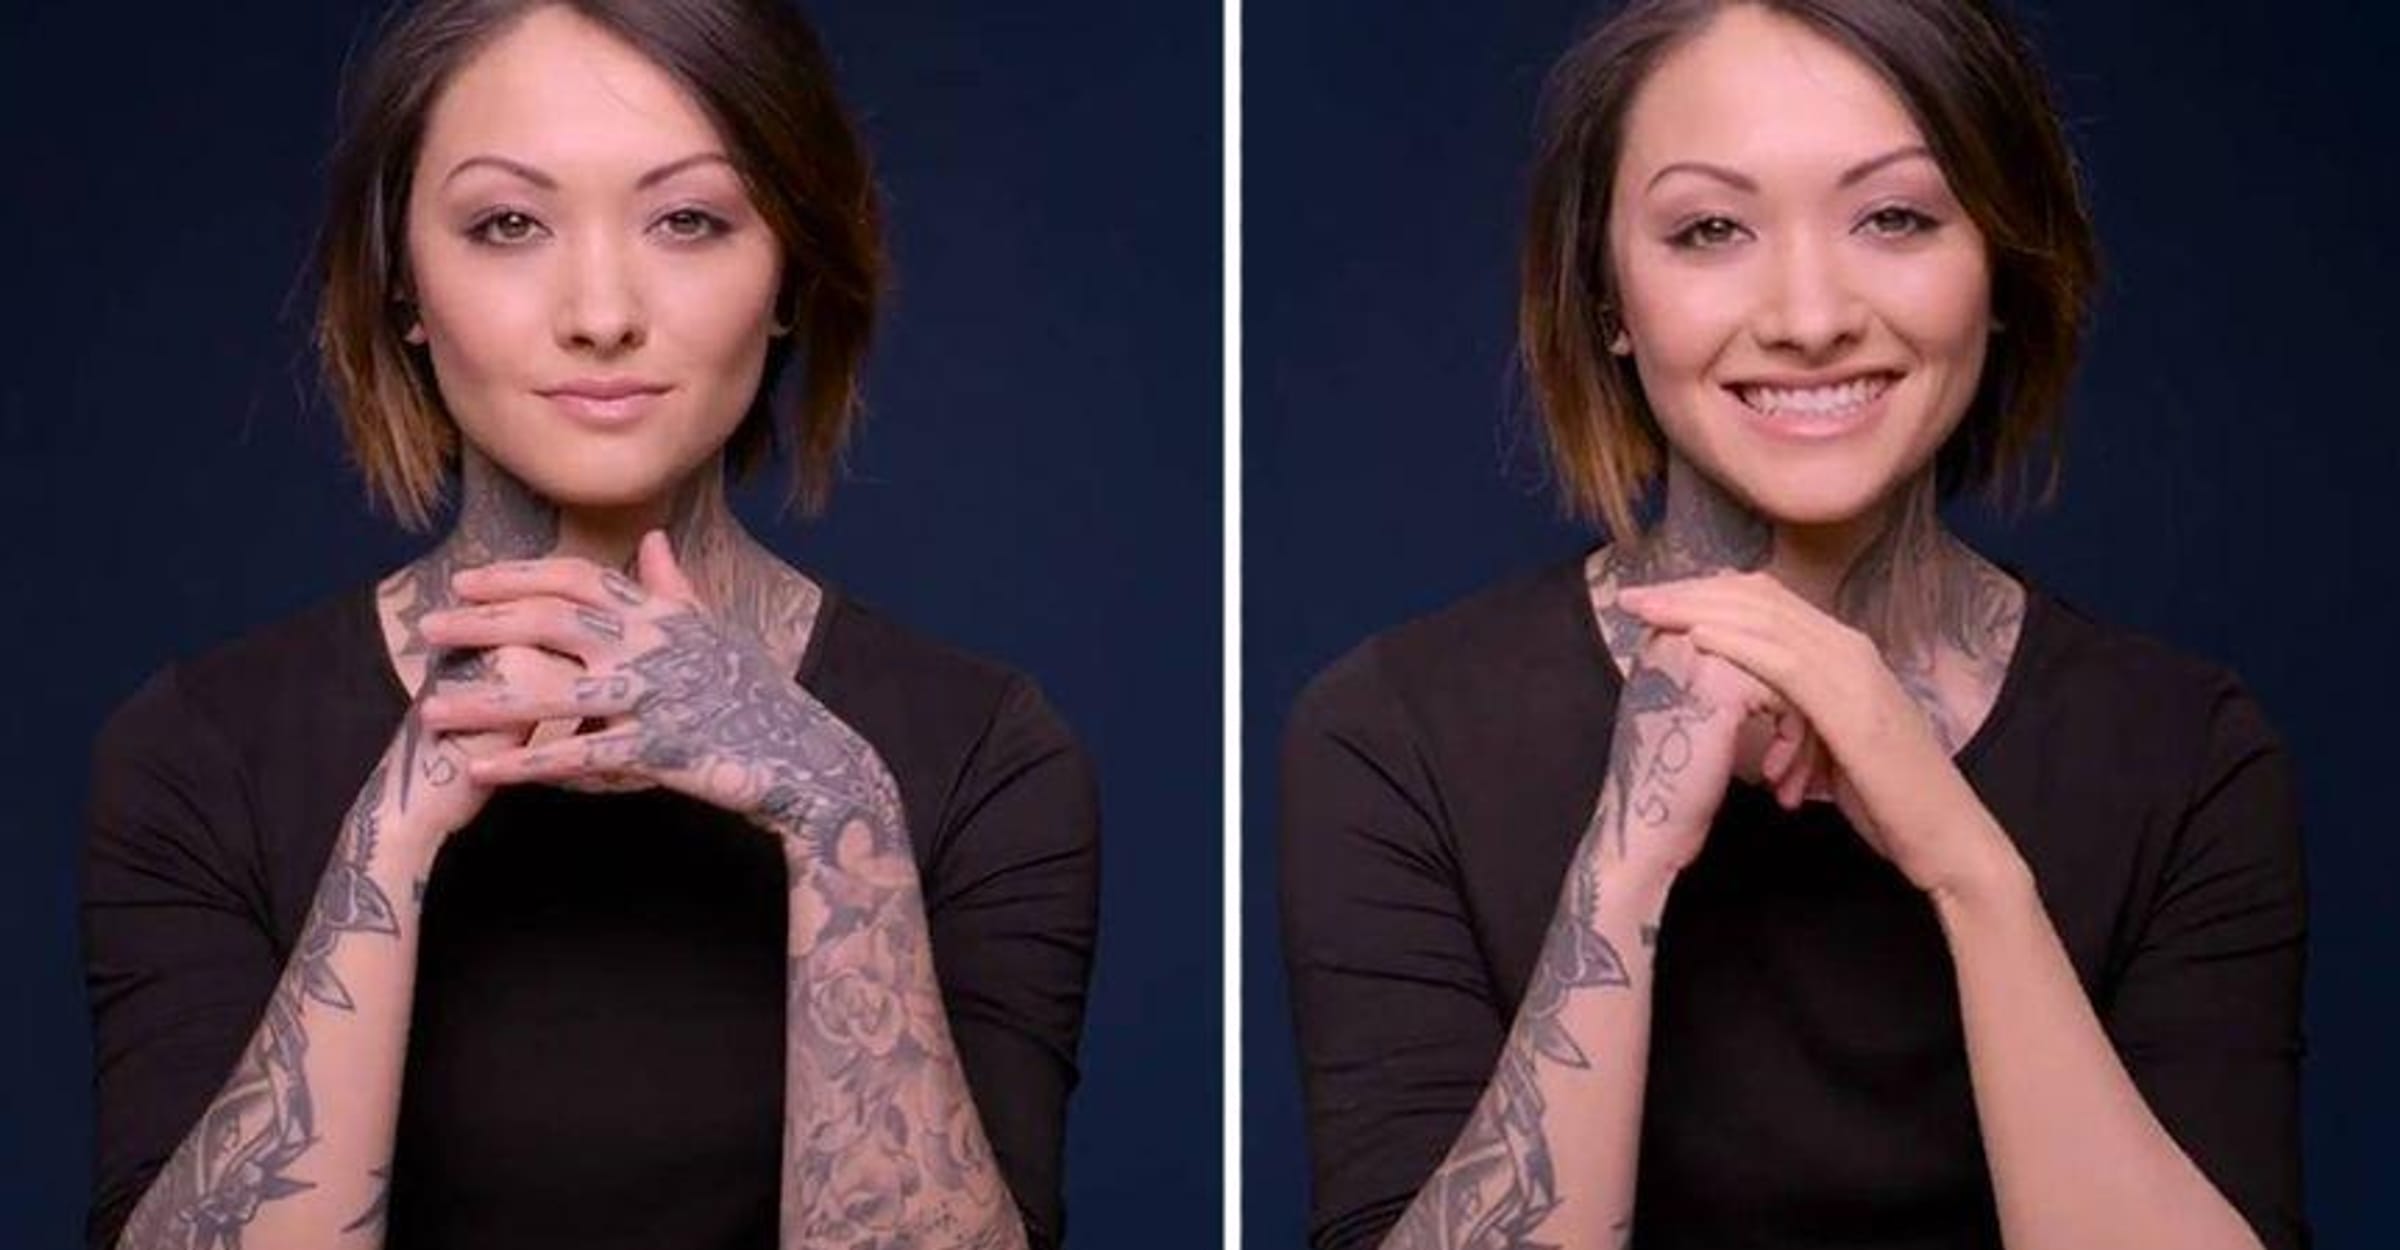 Makeup That Cover Up Tattoos - Best Concealer and Foundation for